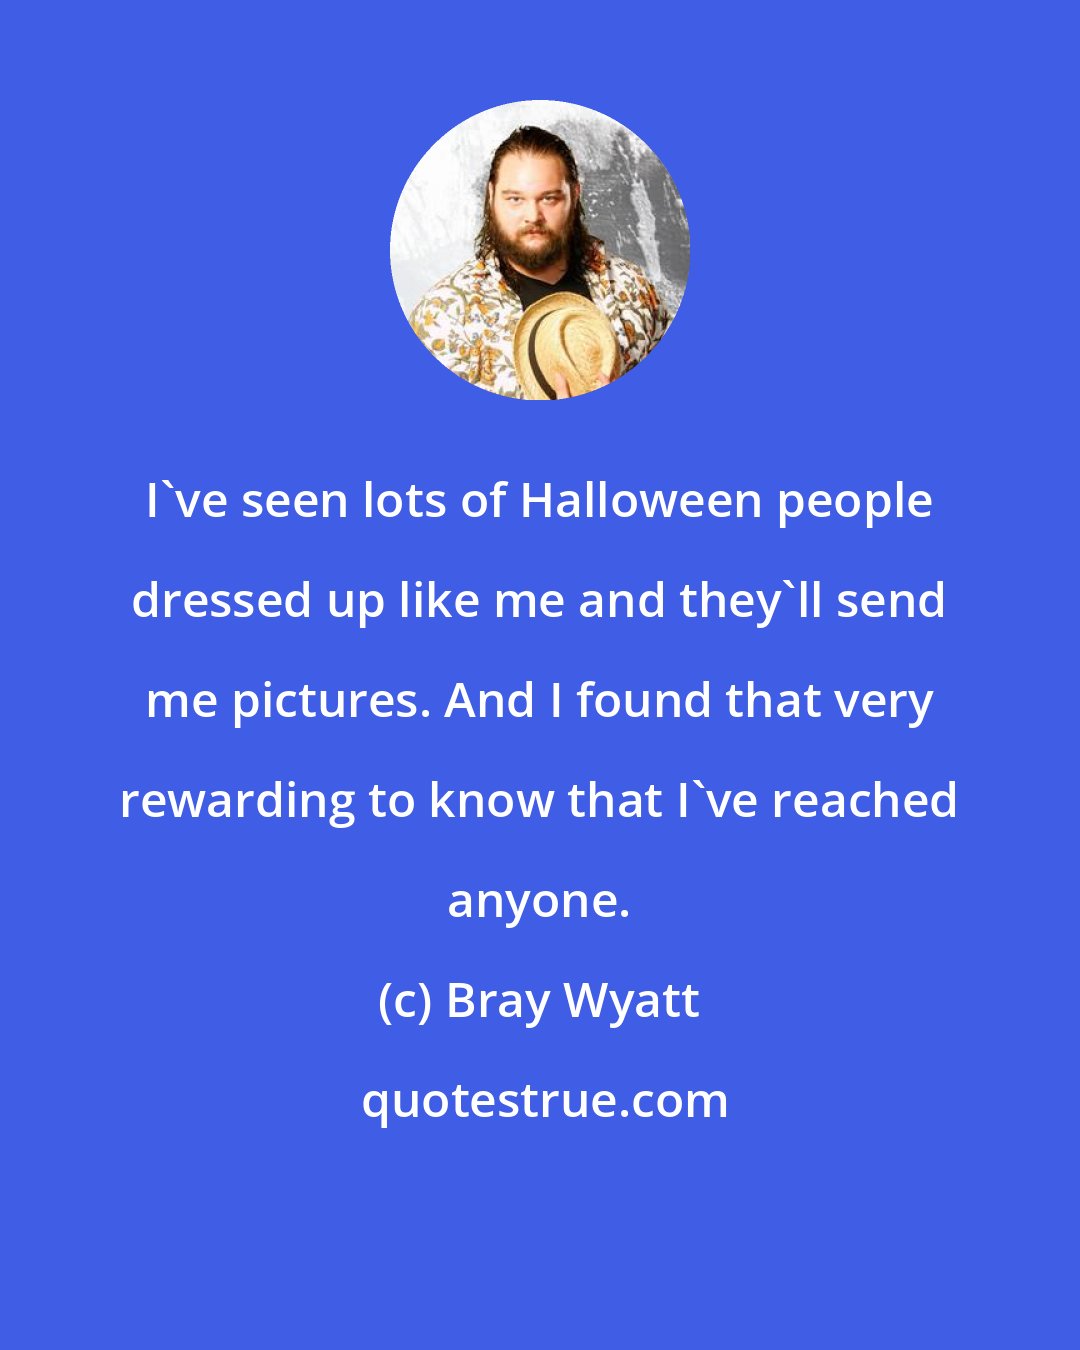 Bray Wyatt: I've seen lots of Halloween people dressed up like me and they'll send me pictures. And I found that very rewarding to know that I've reached anyone.